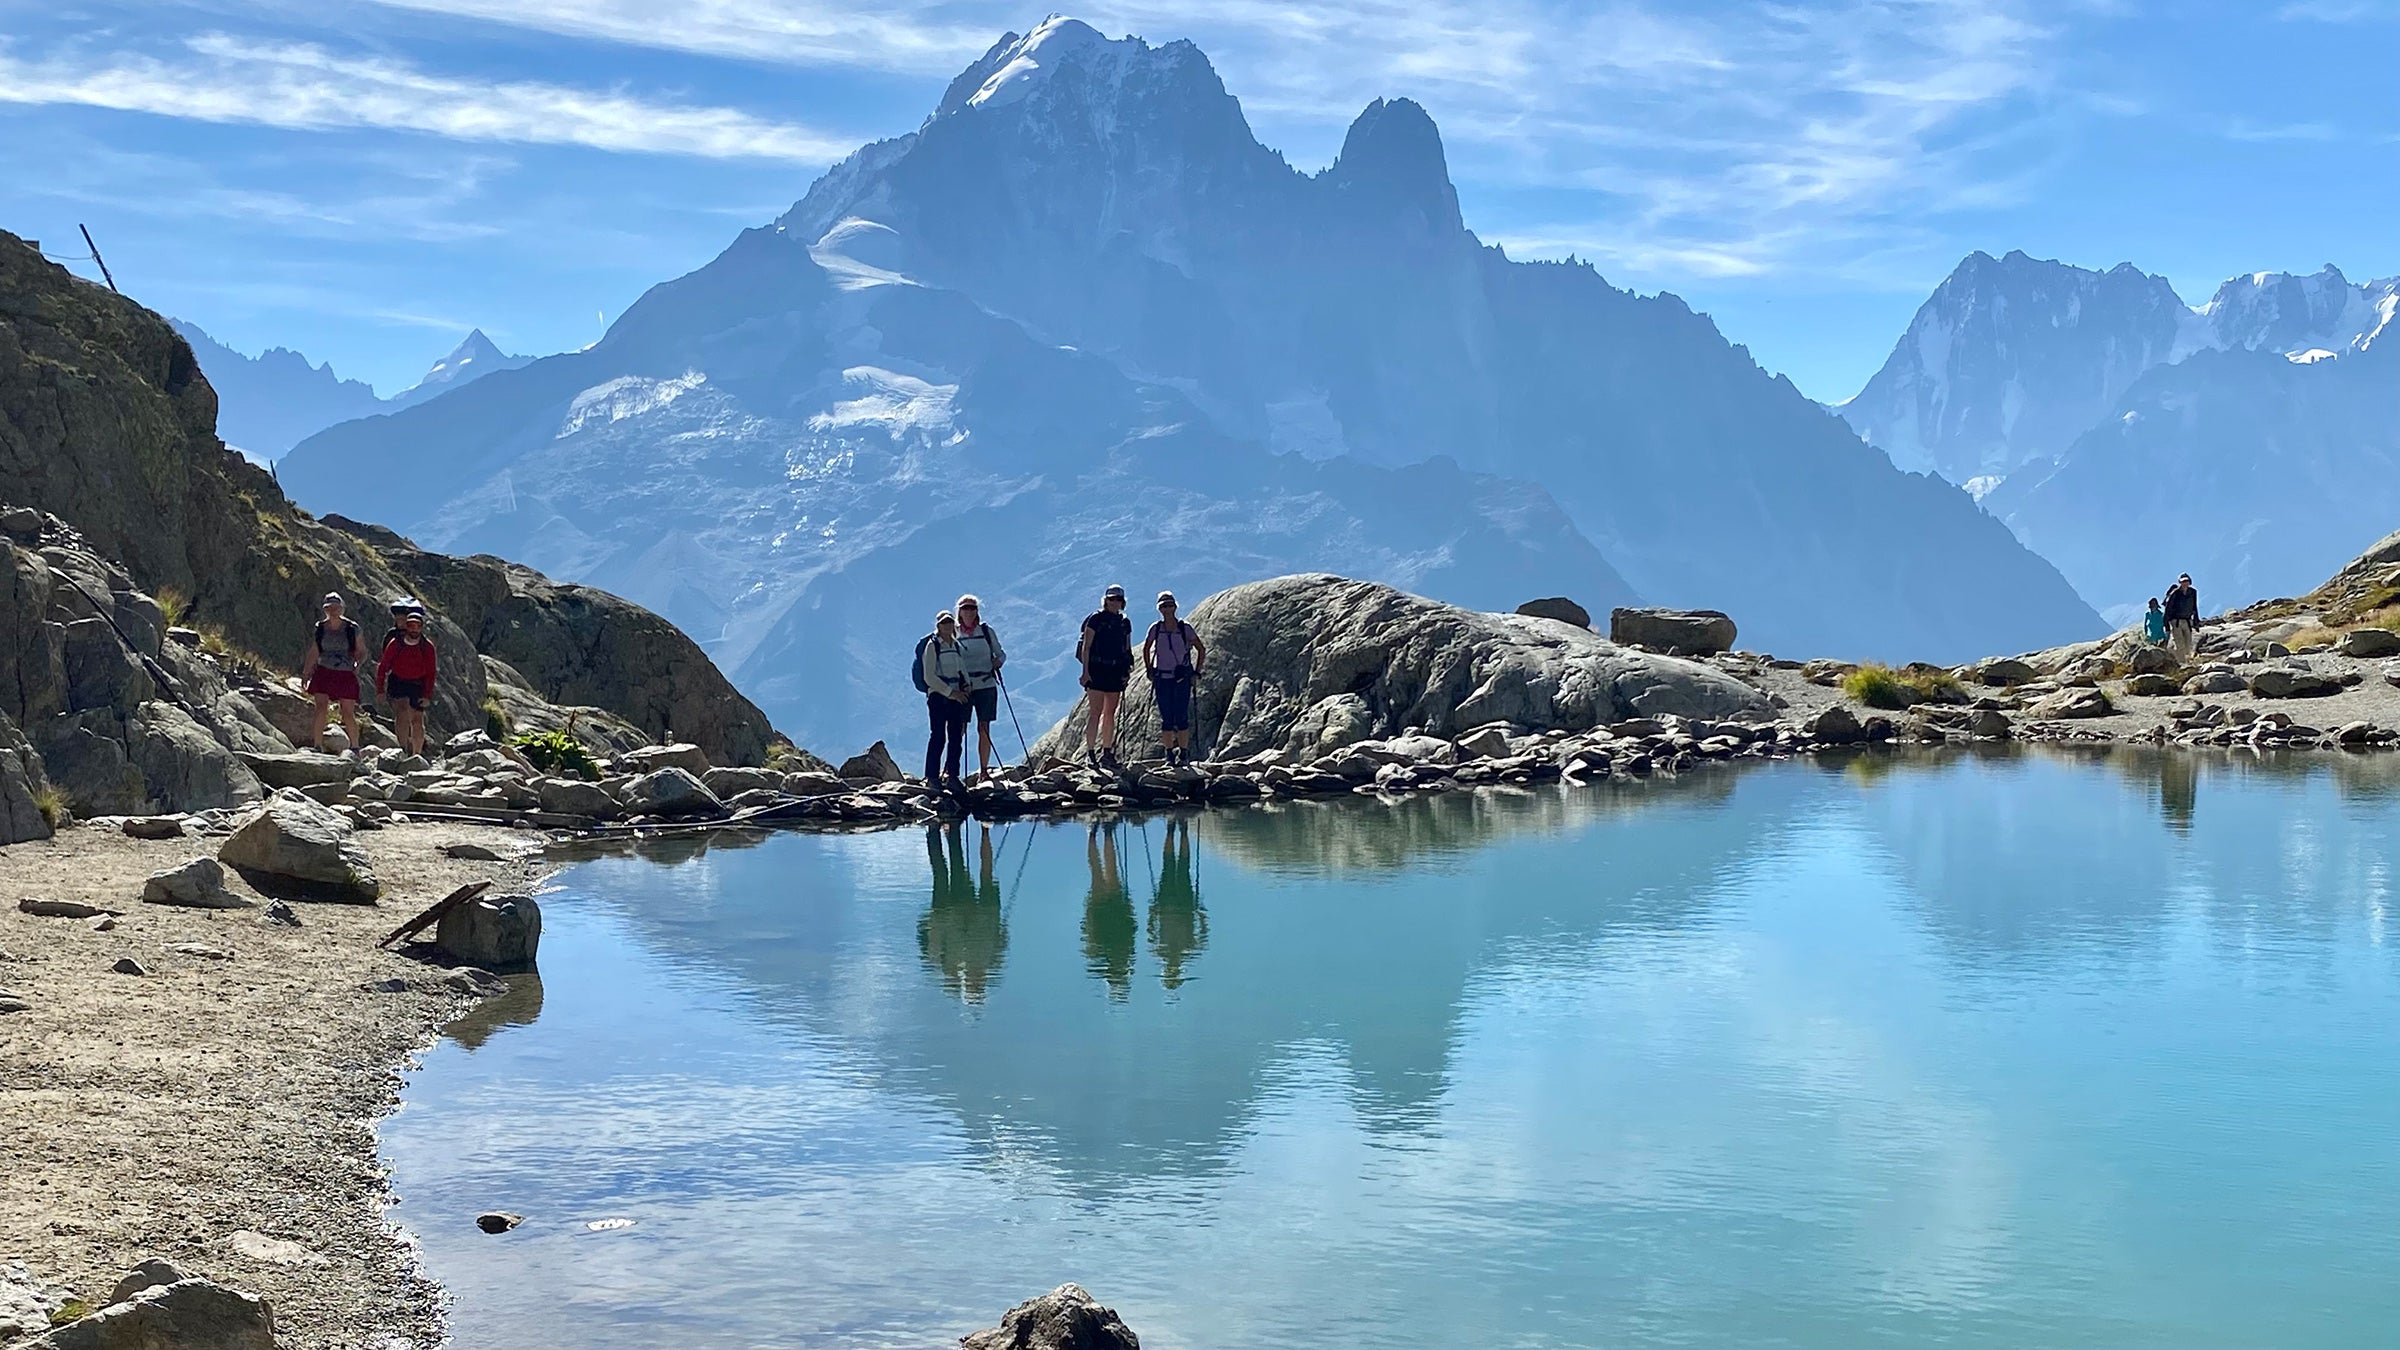 Beginners' Guide to the Tour du Mont Blanc